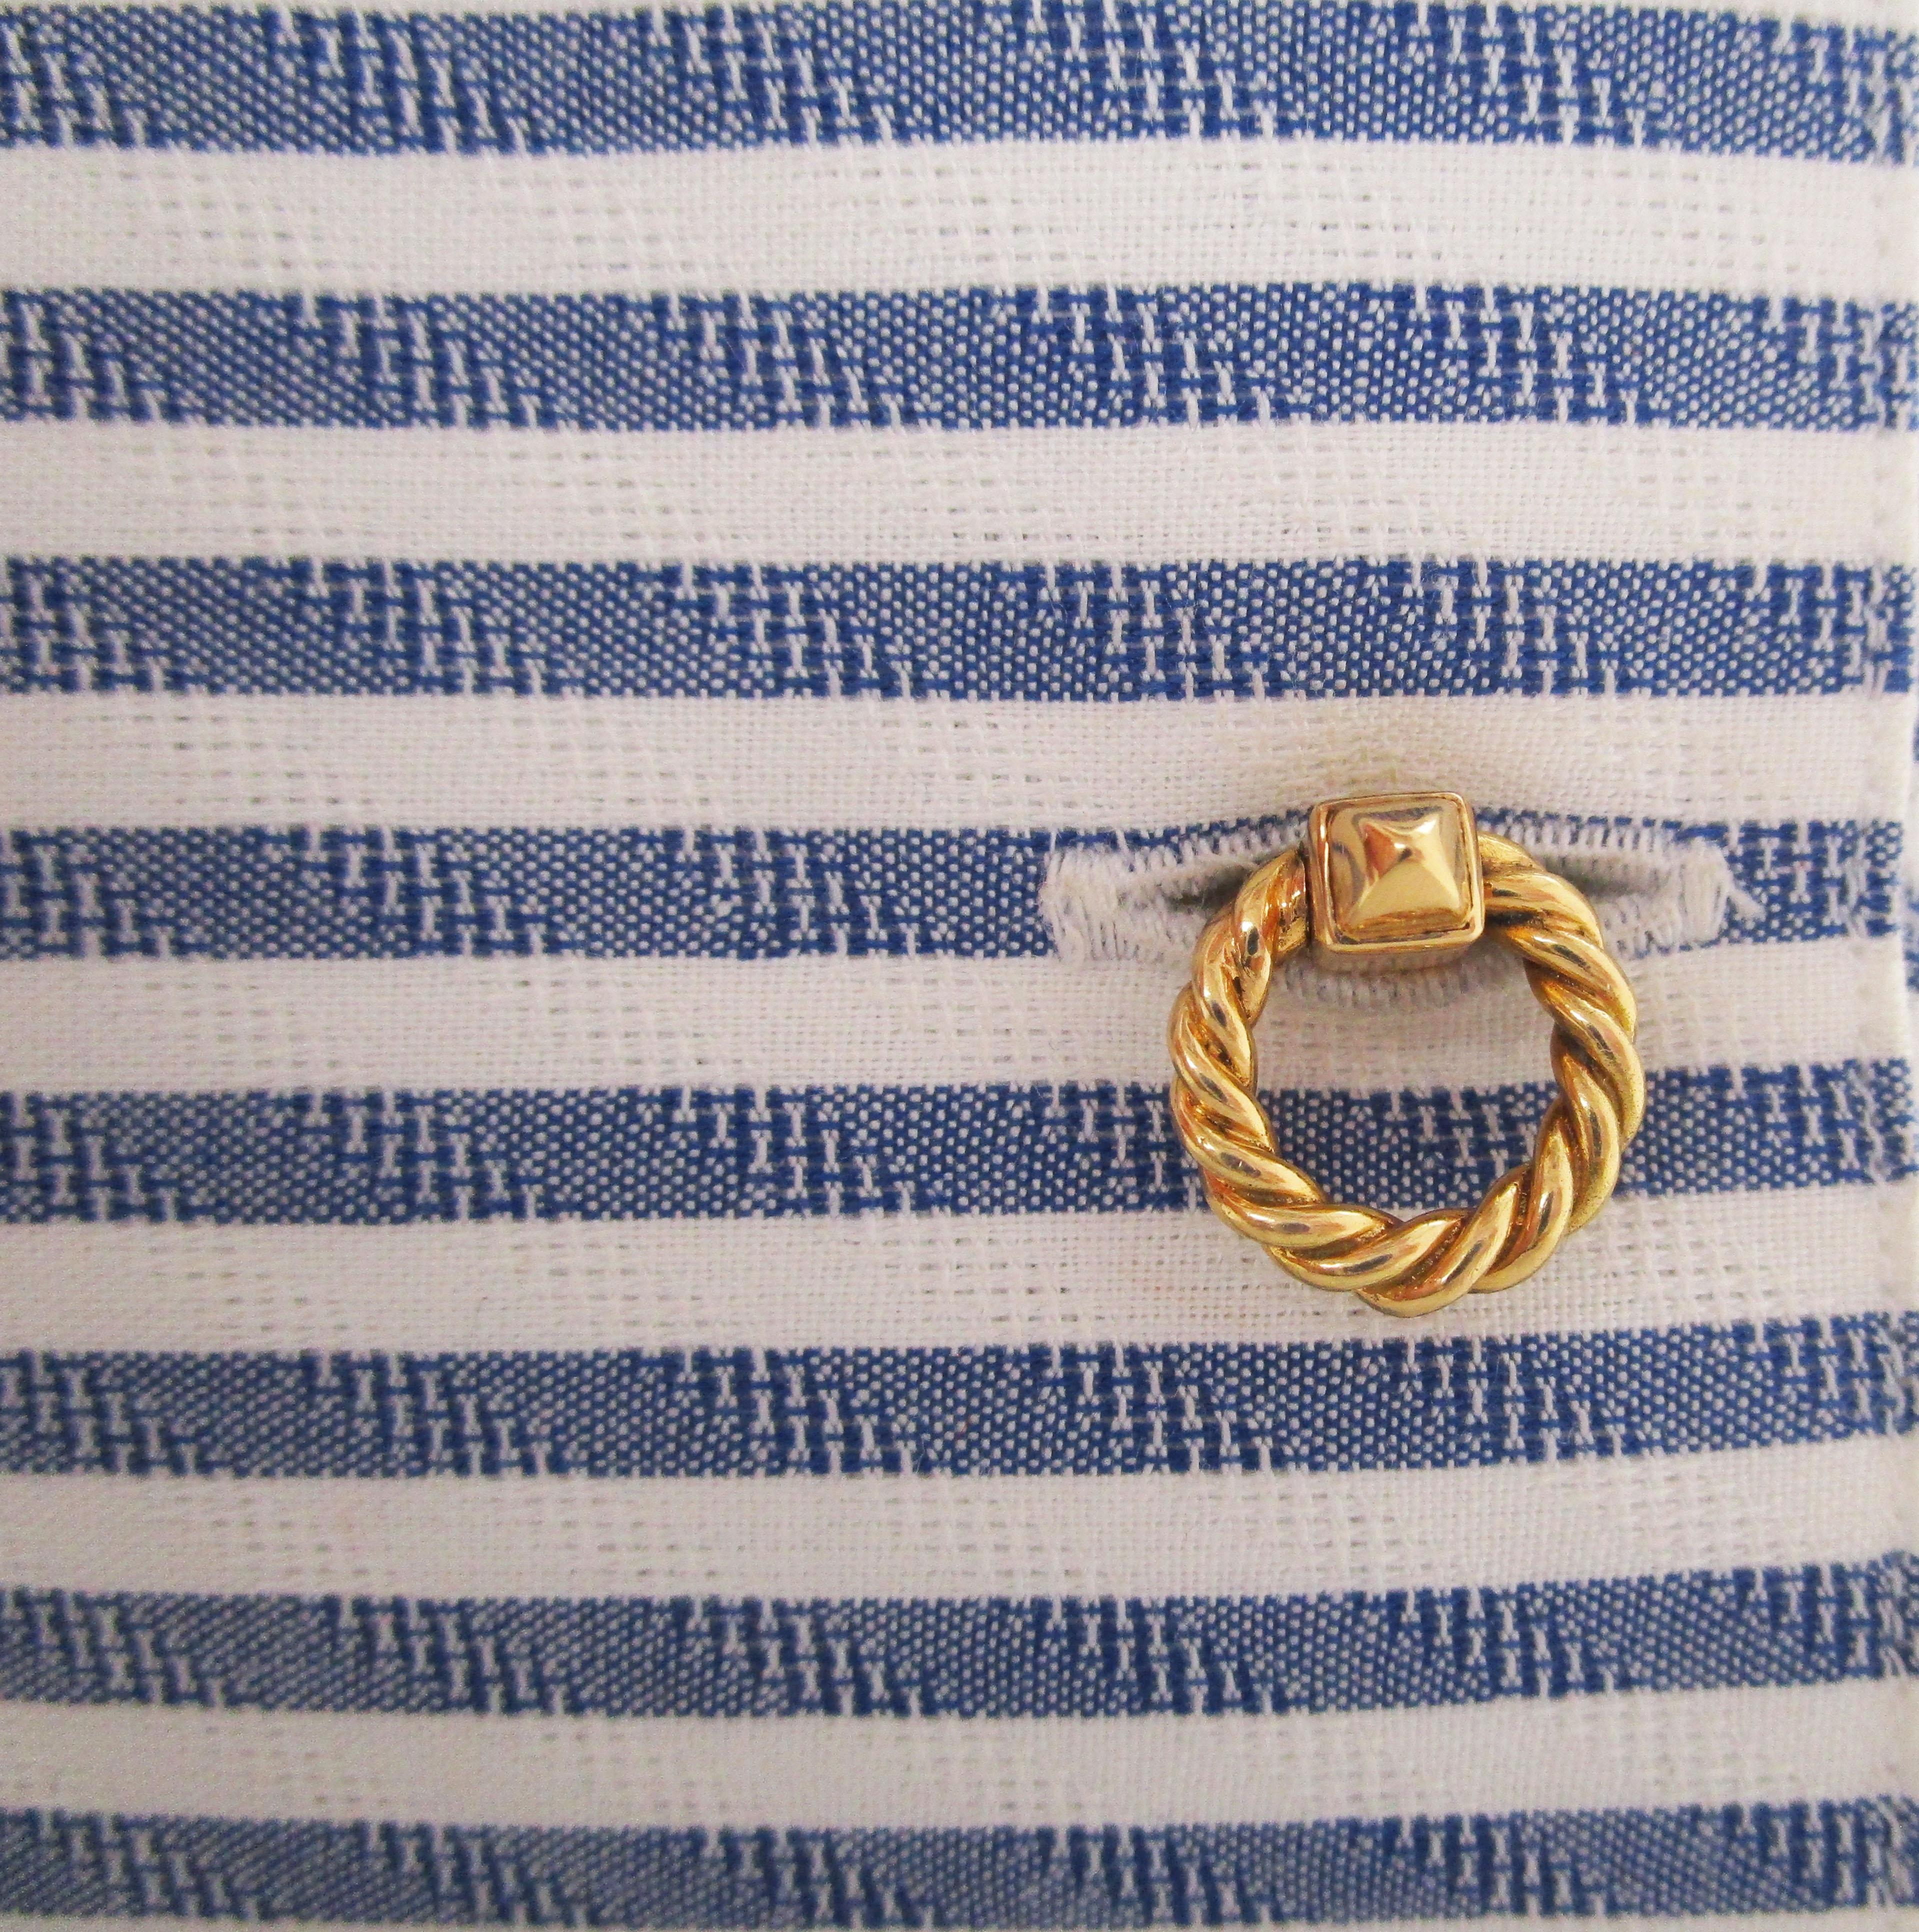 These incredible cufflinks are genuine French Paris Cartier and feature a classic, elegant twisting rope design in rich 18k yellow gold. The definite sophistication of the simplicity of the Cartier design is clear. Every inch of these fine cufflinks